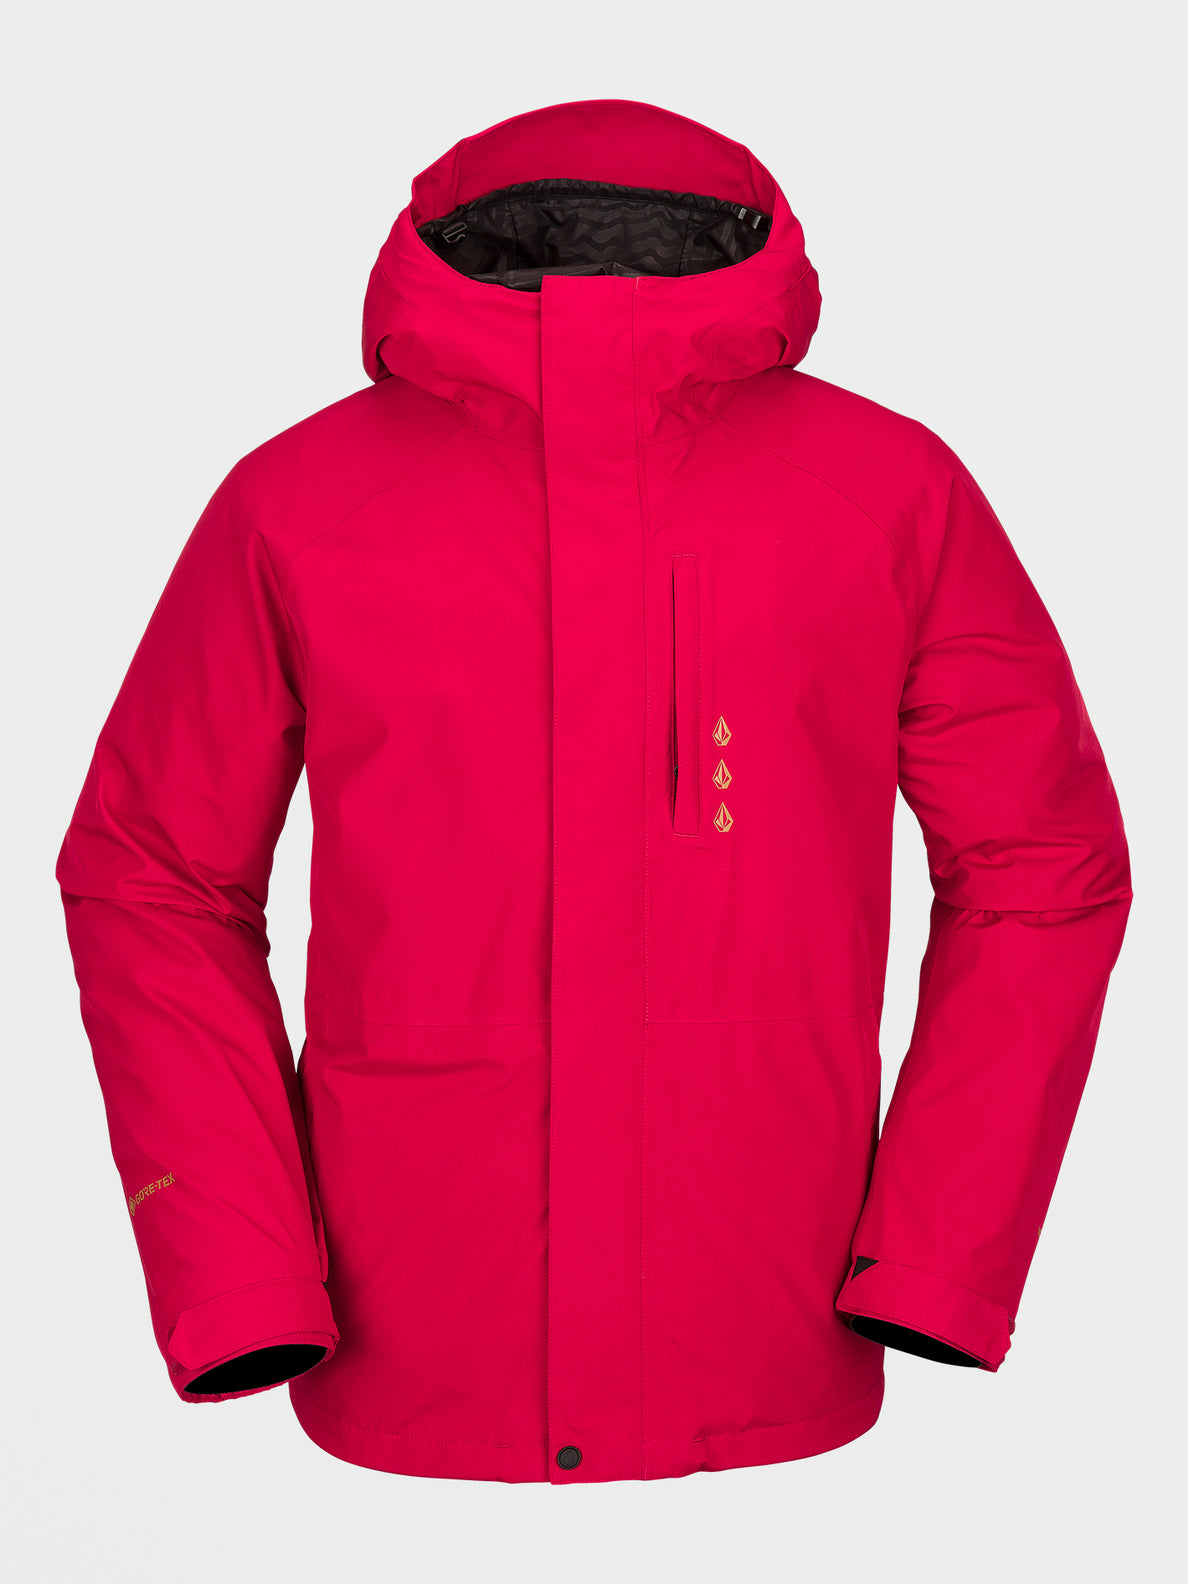 VOLCOM GUIDE GORE-TEX JACKET RED S　ボルコム